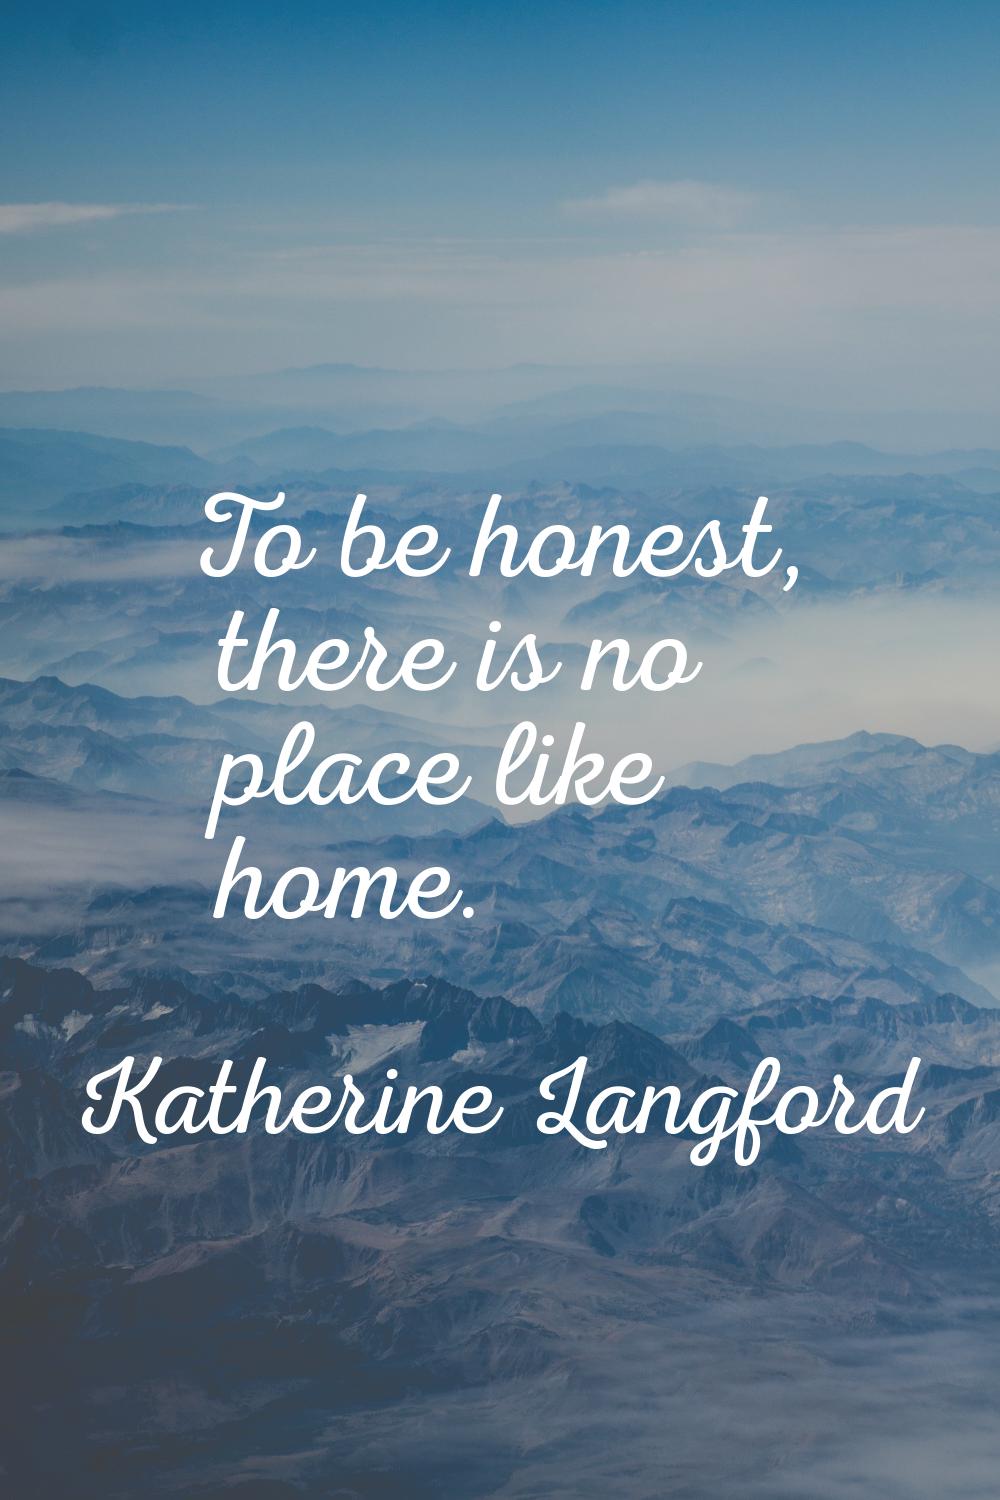 To be honest, there is no place like home.